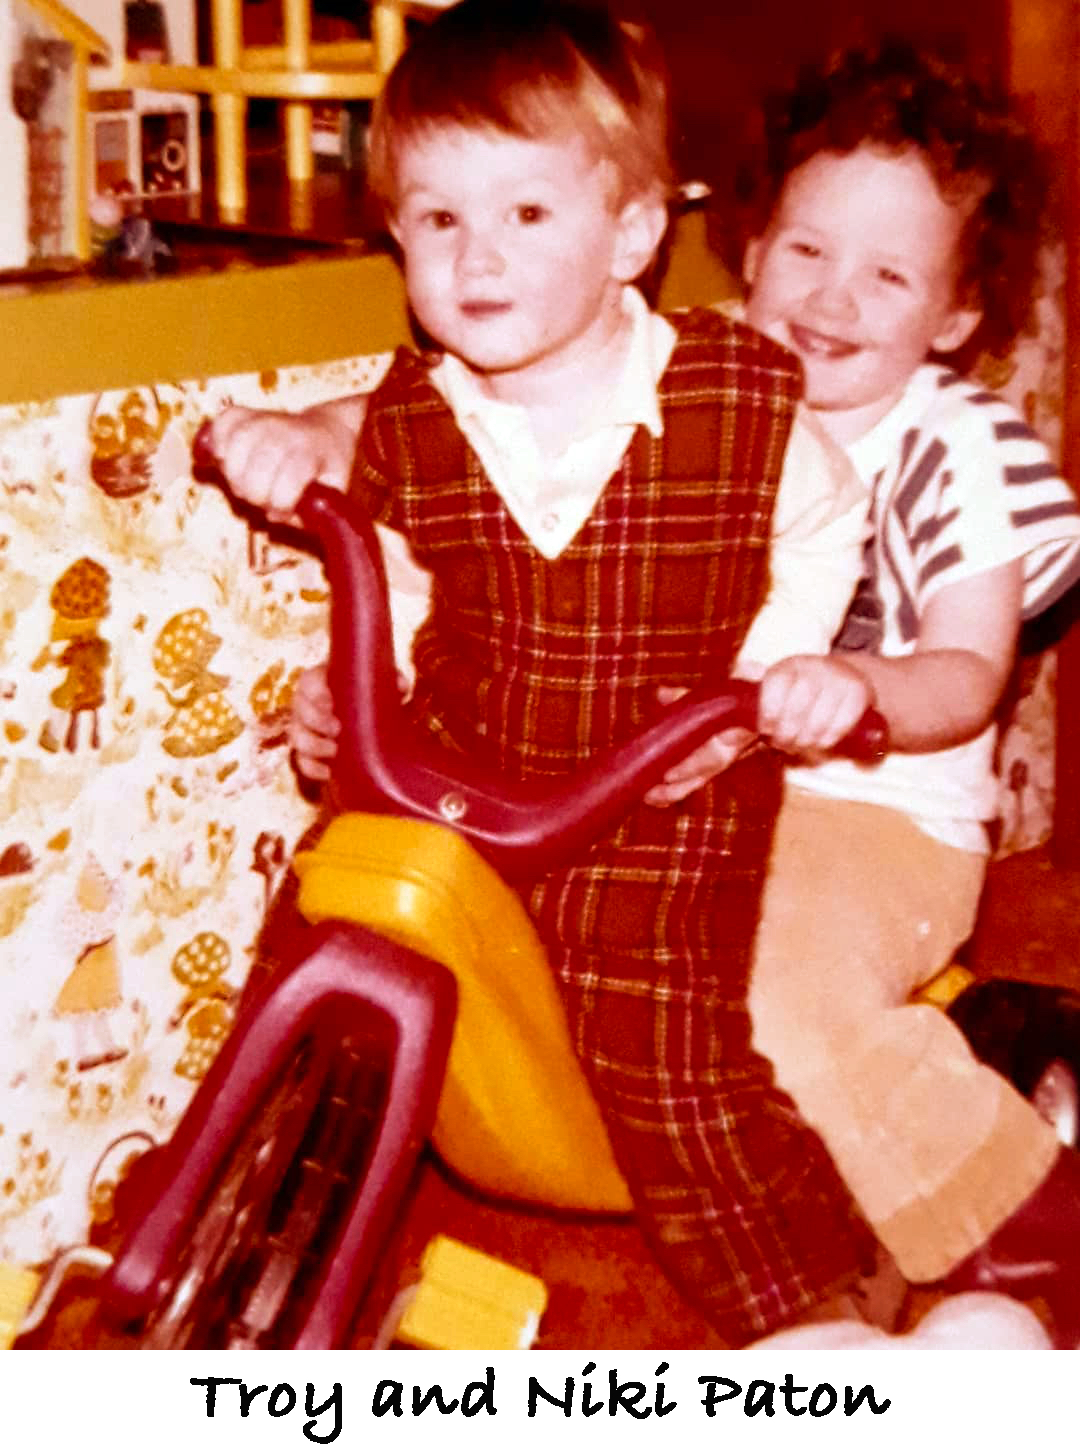 Troy and Niki Paton are riding on a “Big Wheel” tricycle.
               Troy is wearing a bright red coverall.